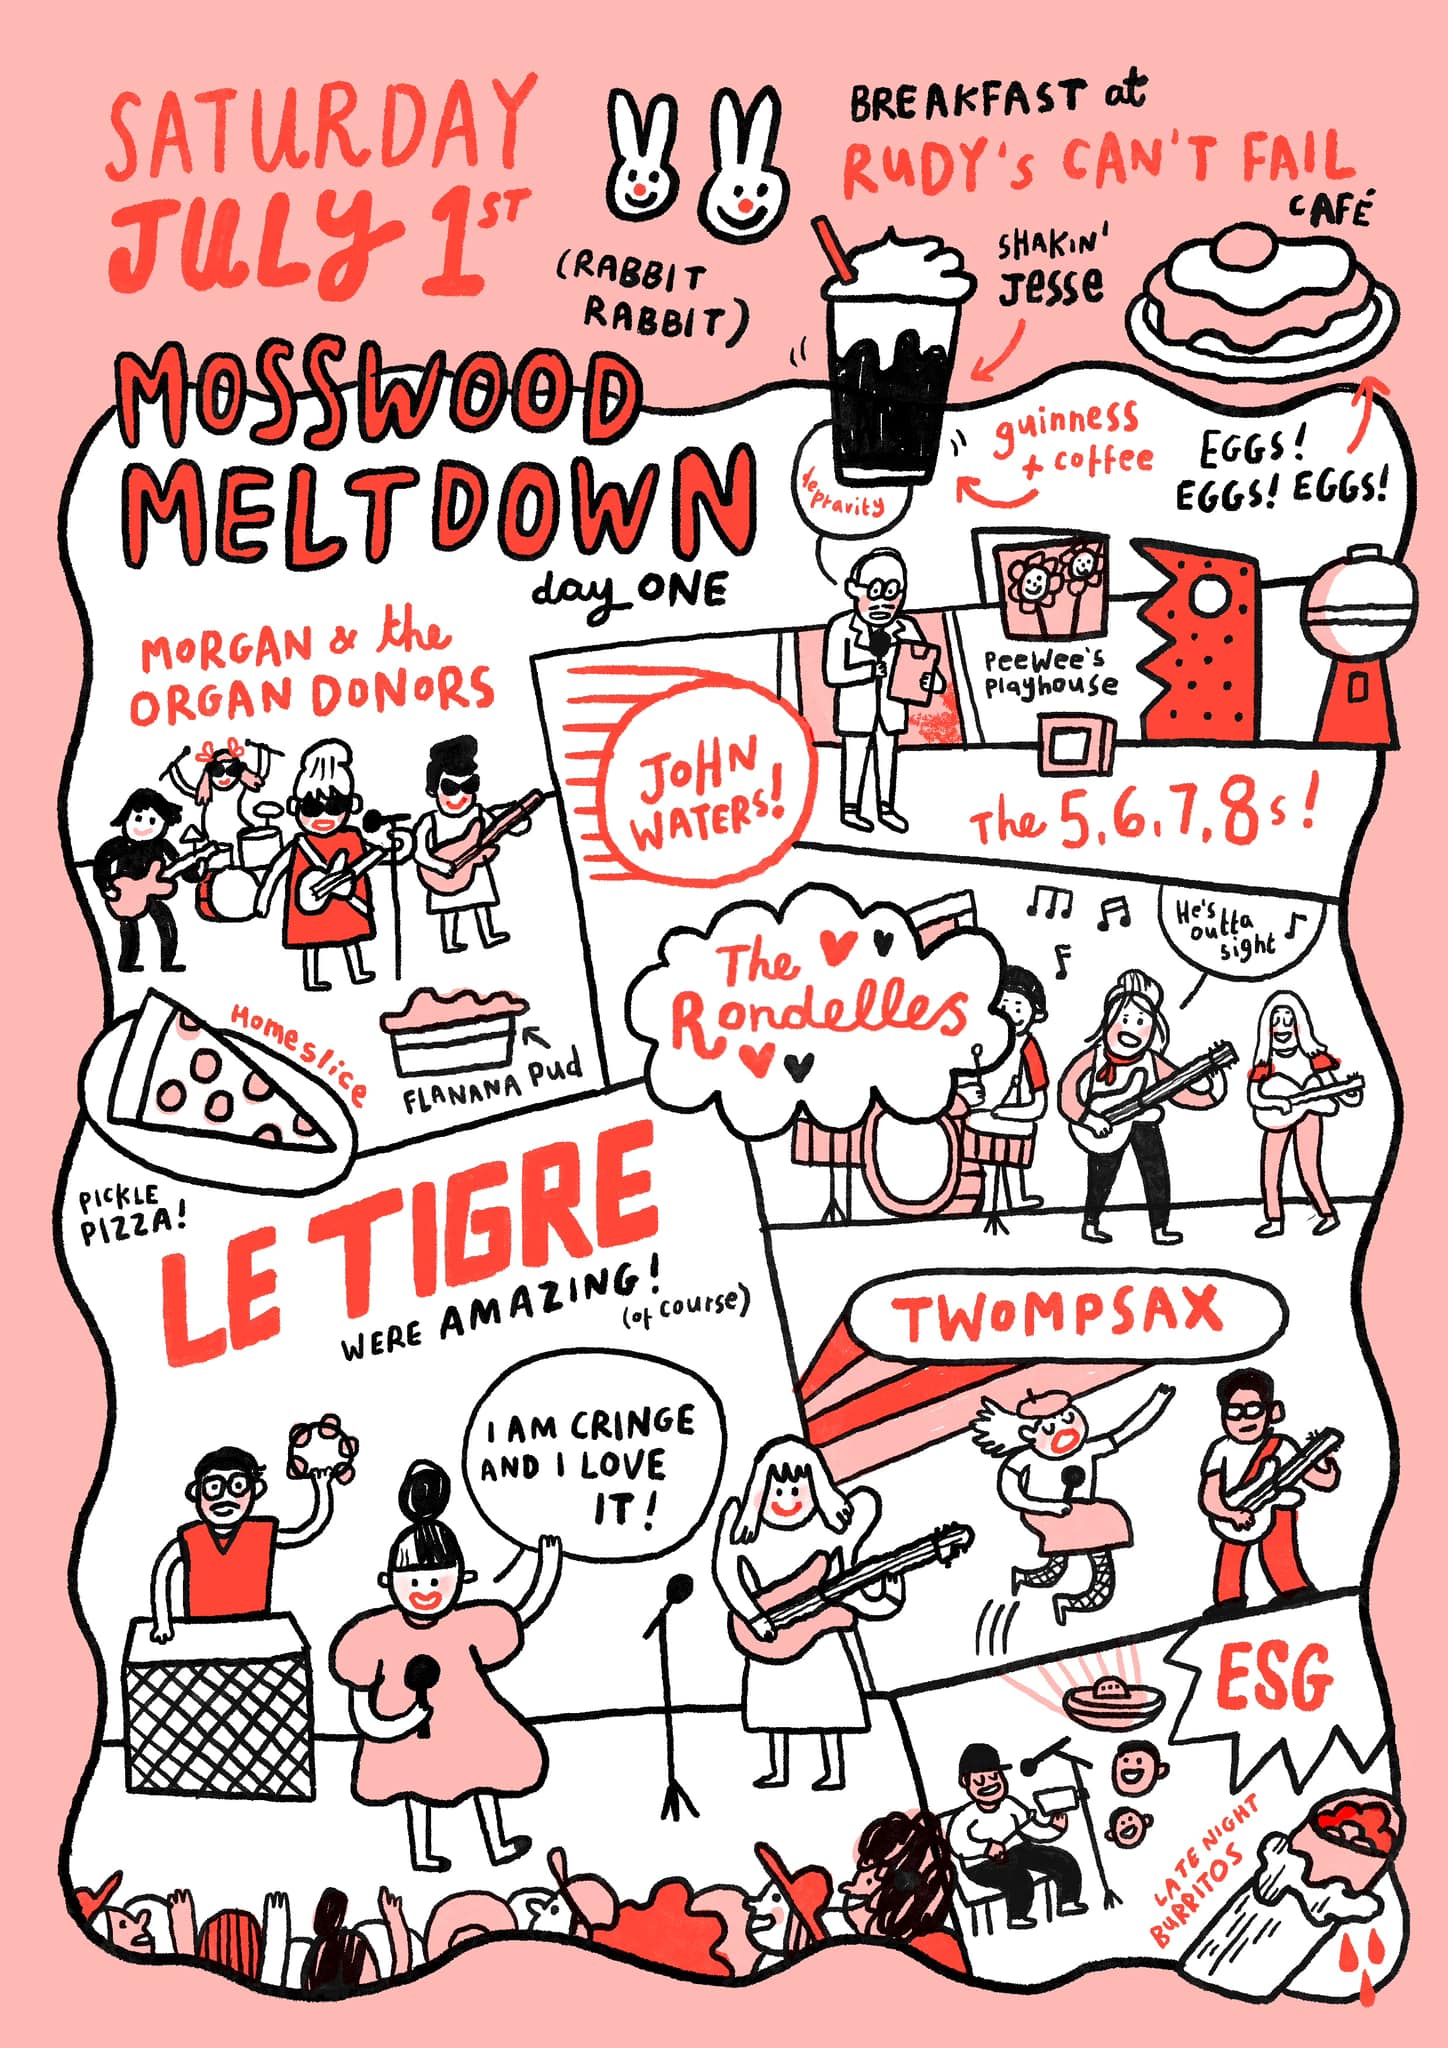 Mosswood Meltdown diary by Gemma Correll featuring Le Tigre and John Waters